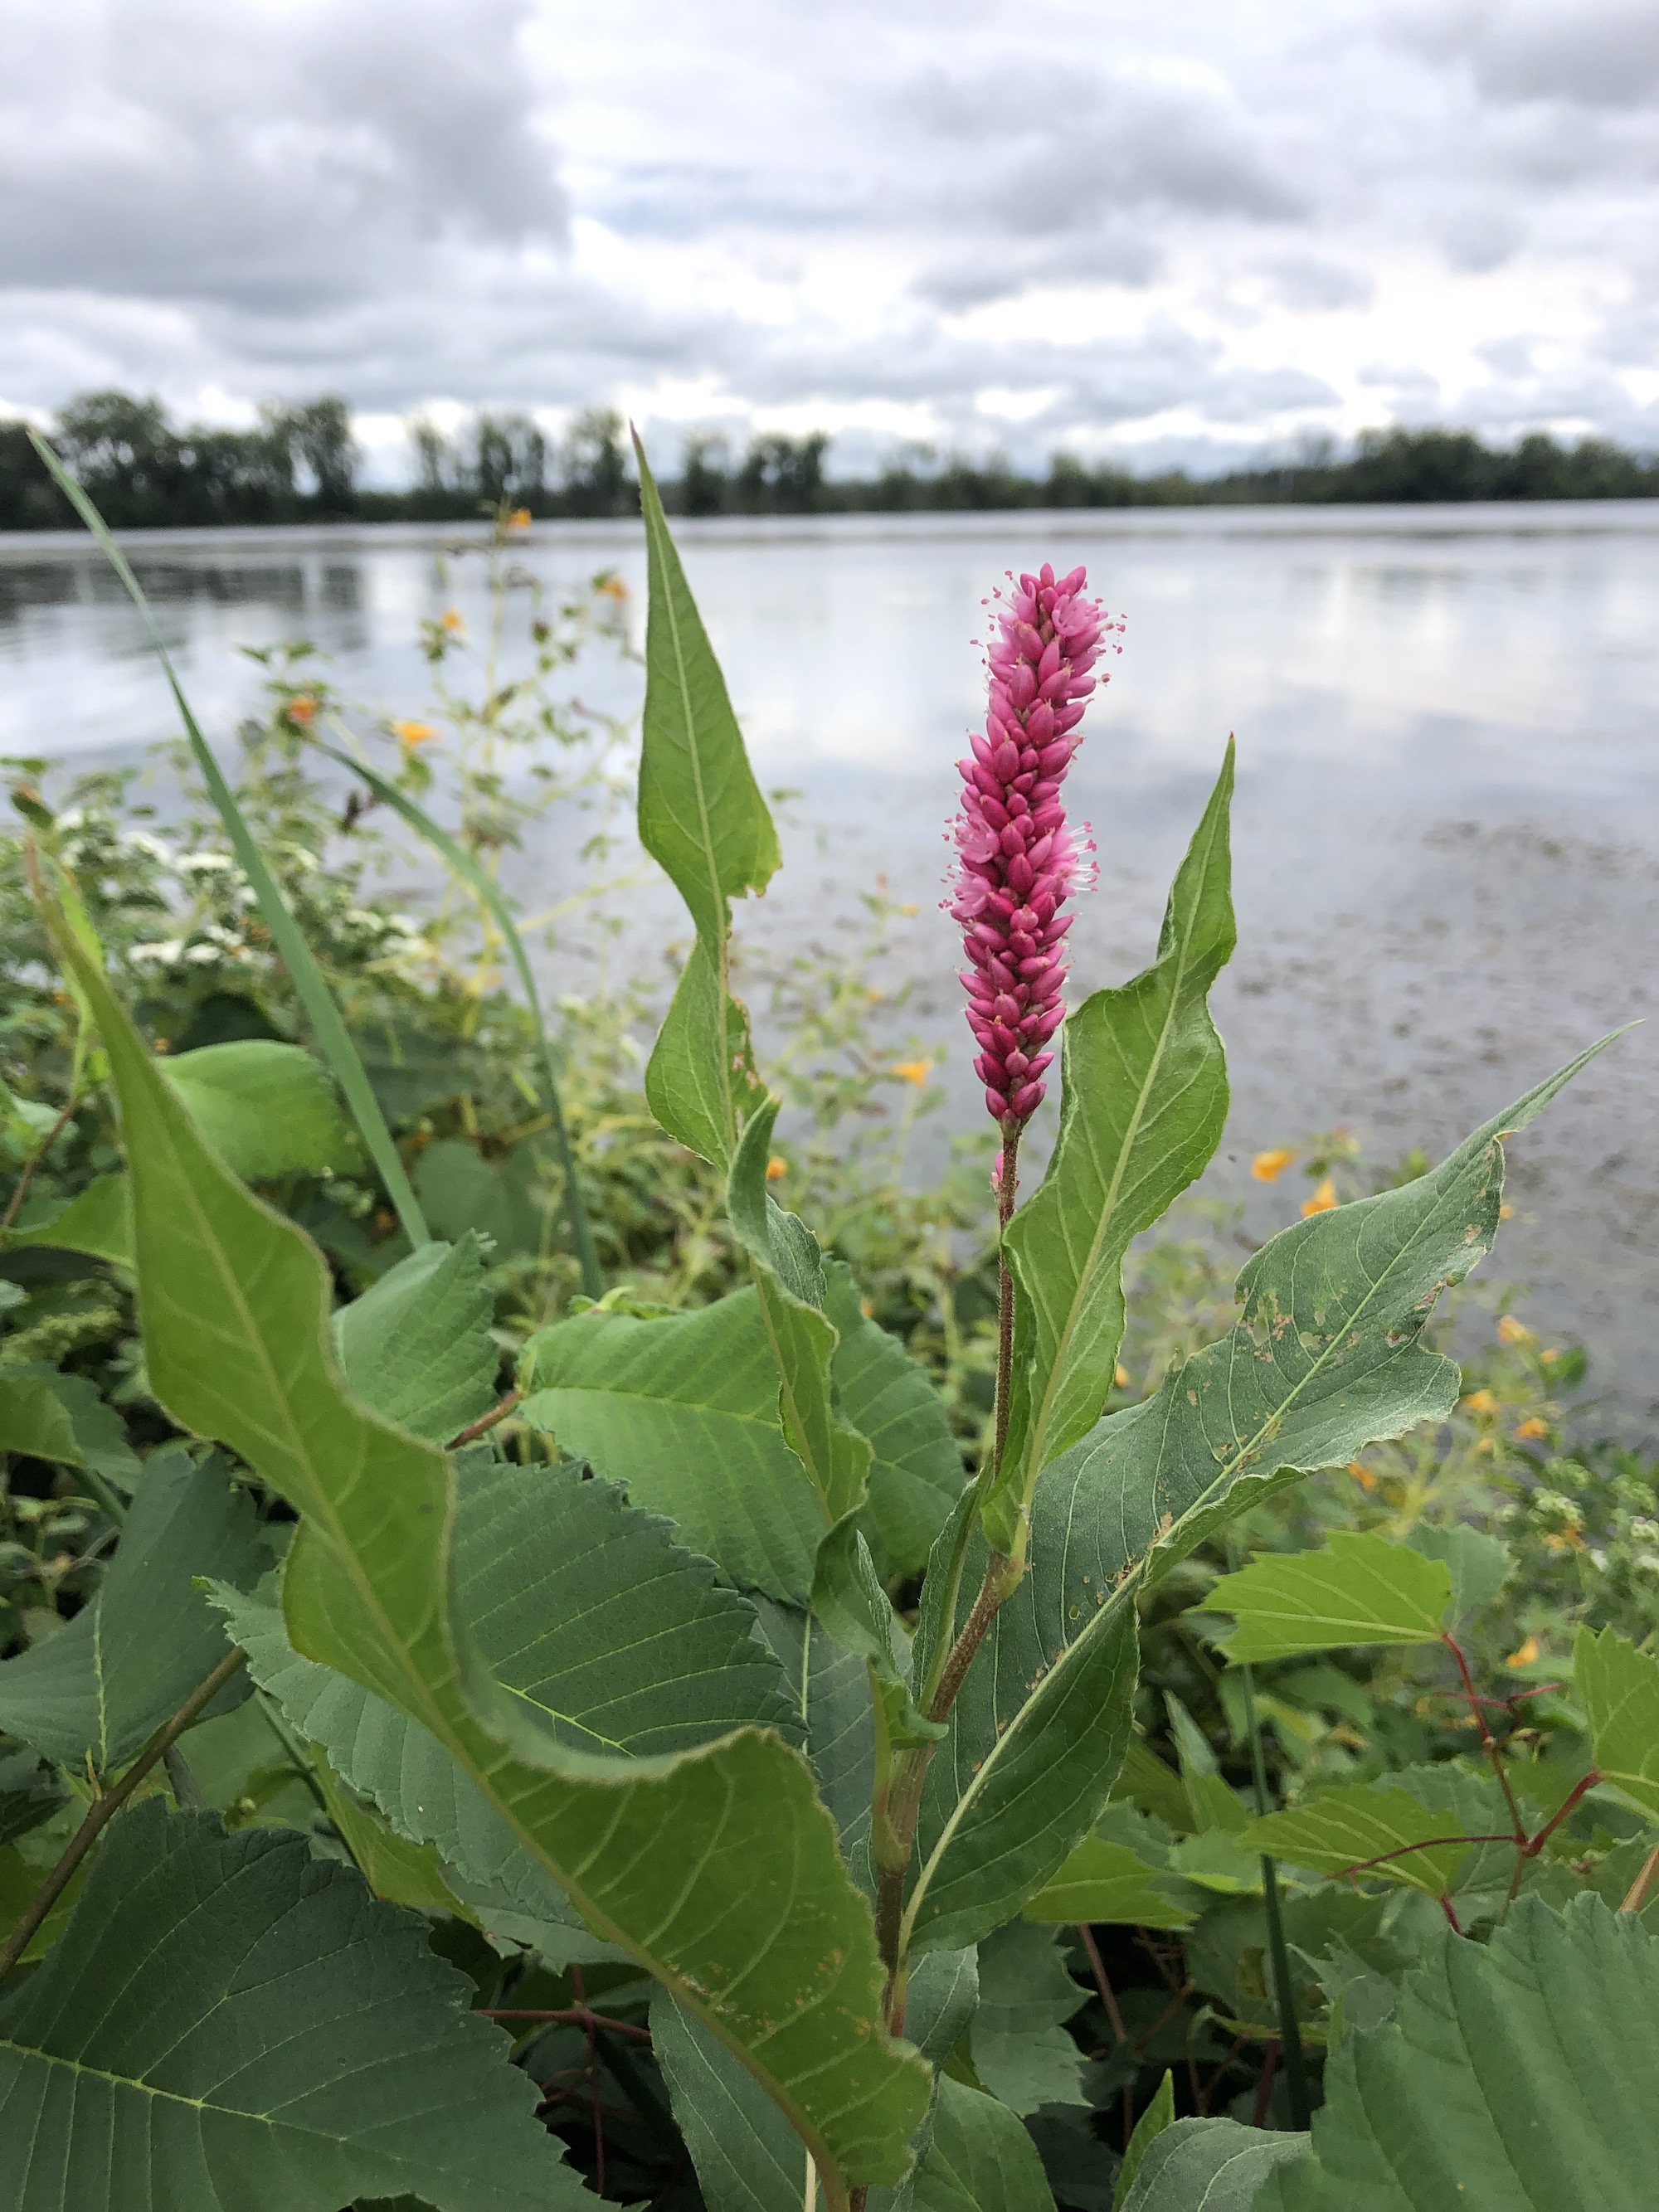 Swamp Smartweed on the shore of Lake Wingra in Vilas Park in Madison, Wisconsin on September 4, 2021.